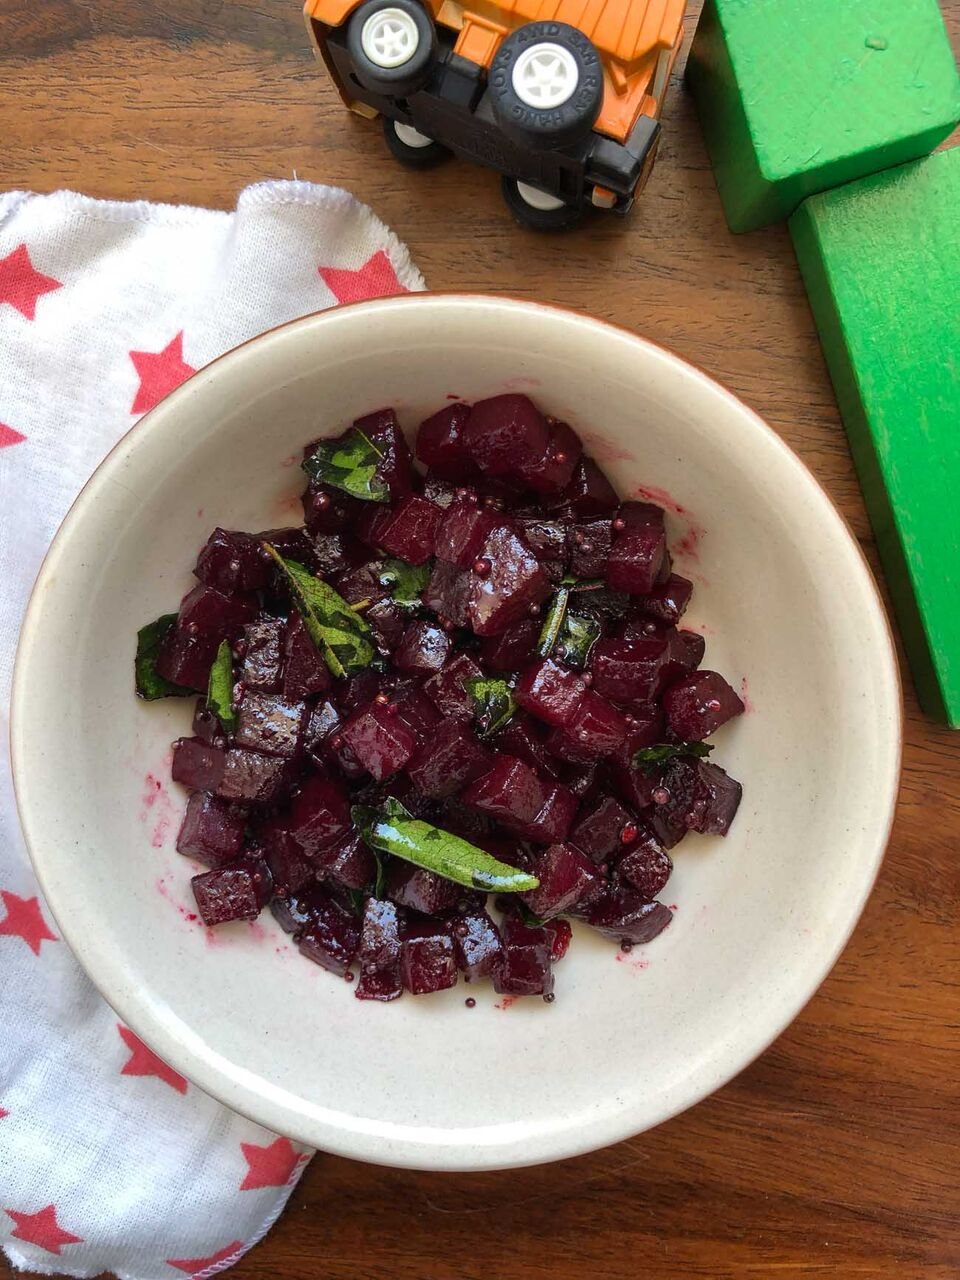 Beetroot Poriyal Sabzi Recipe For Babies And Toddlers Over 10 months